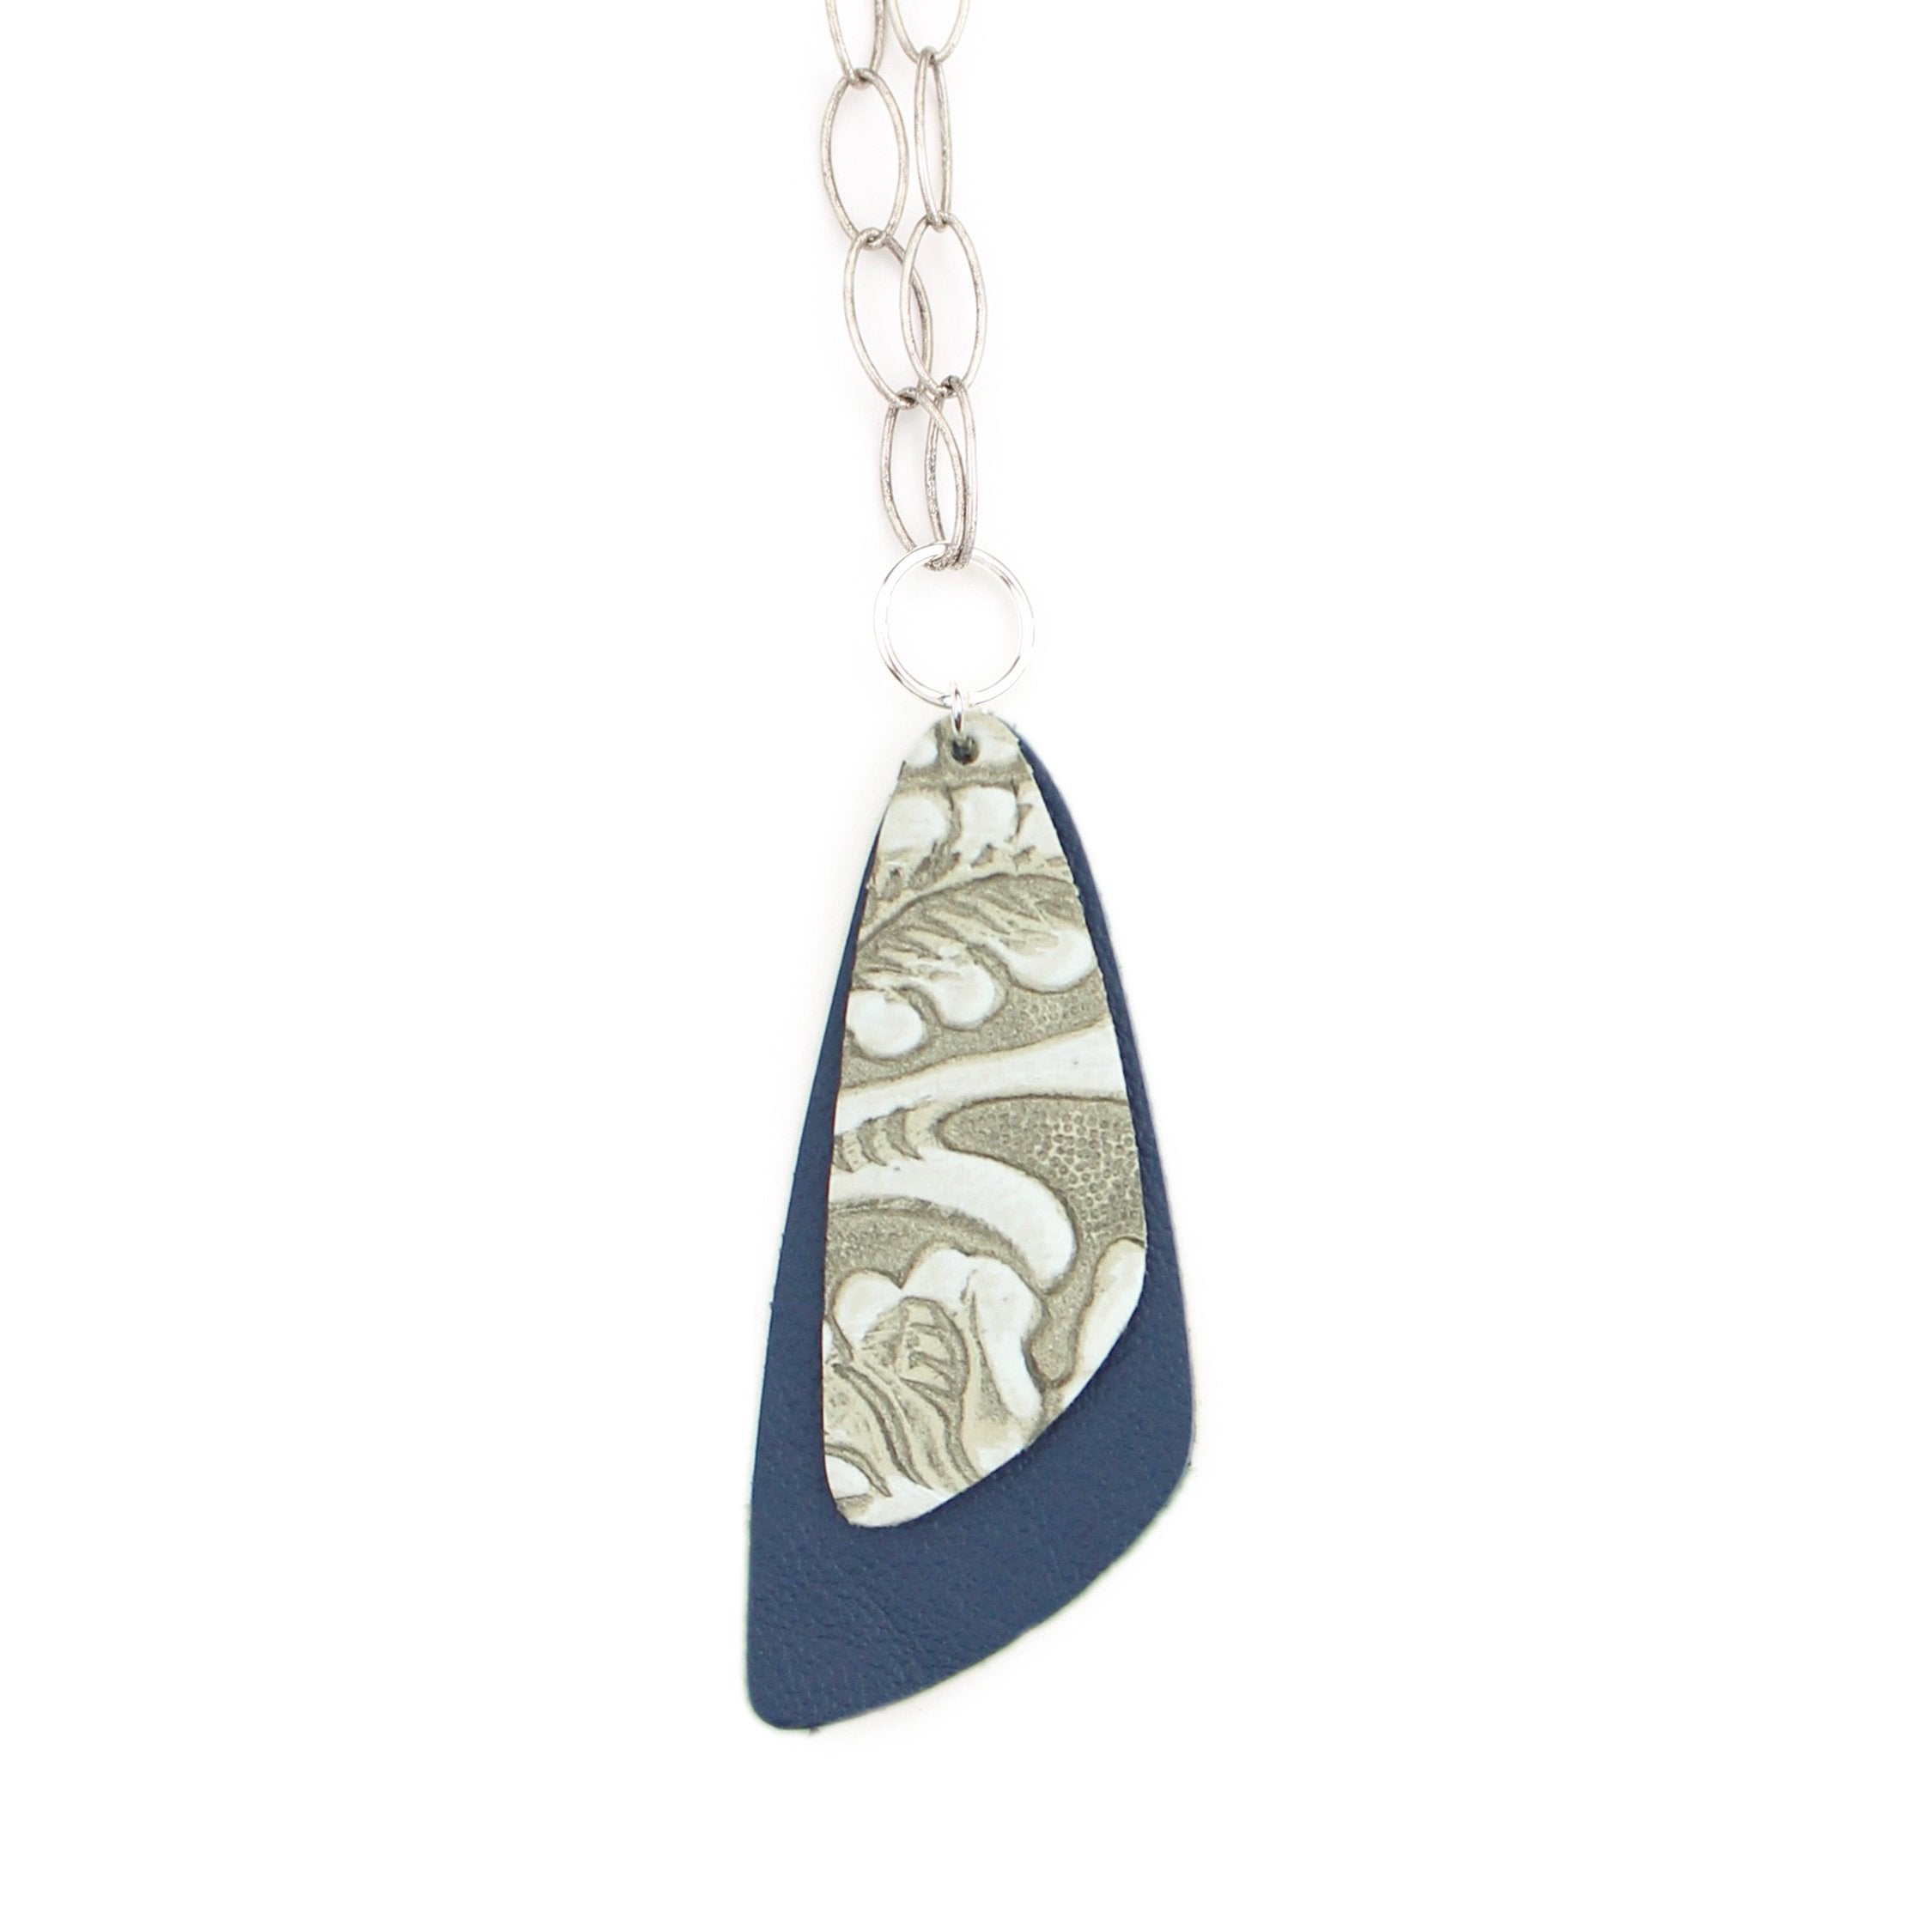 the double descent necklace - tooled grey over navy